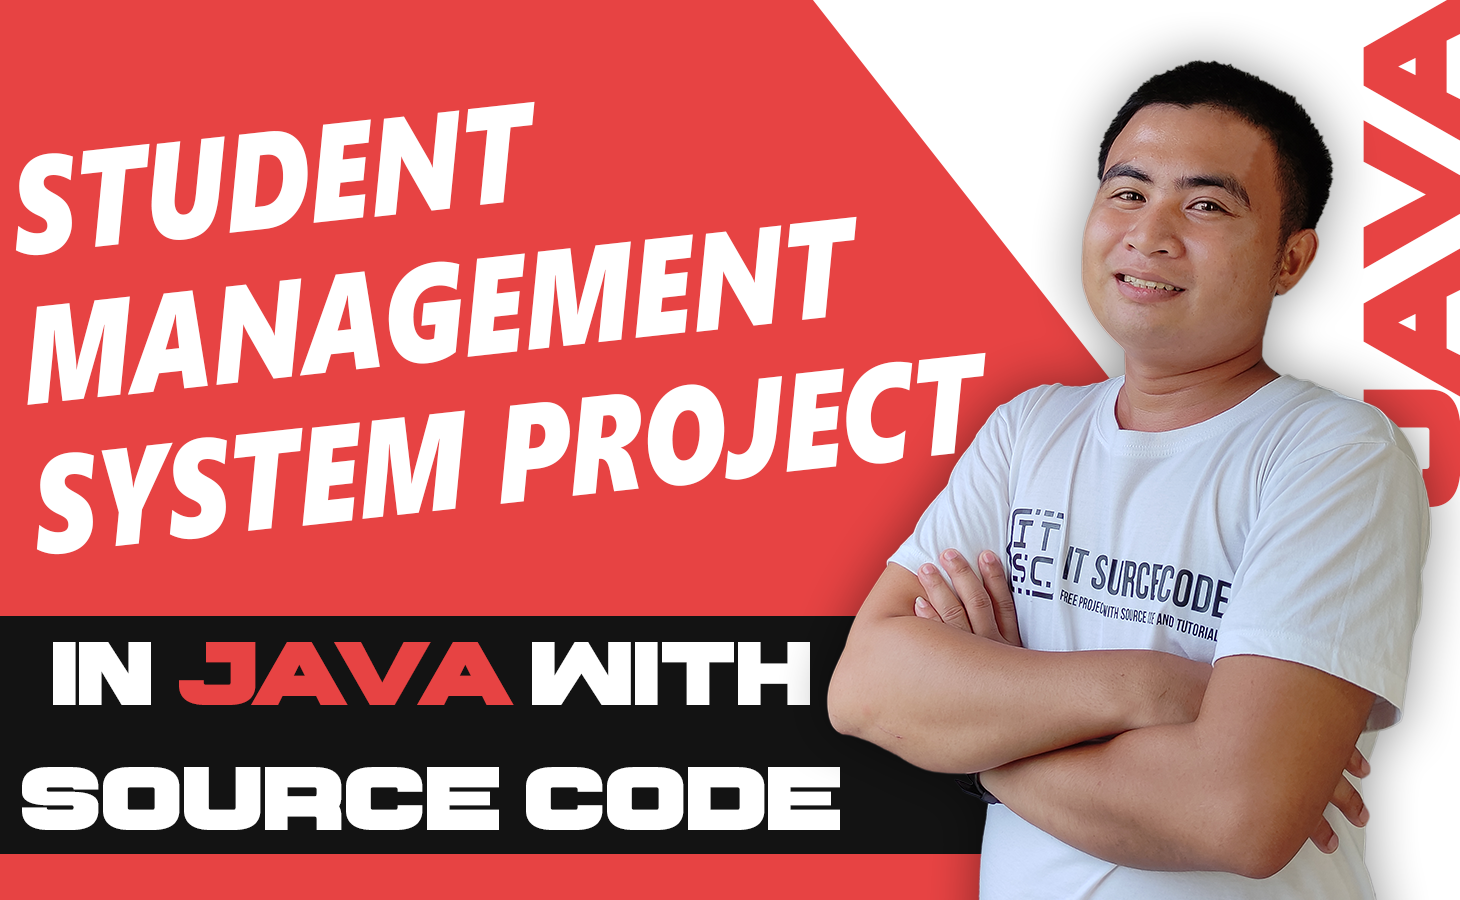 Student Management System Project In Java With Source Code